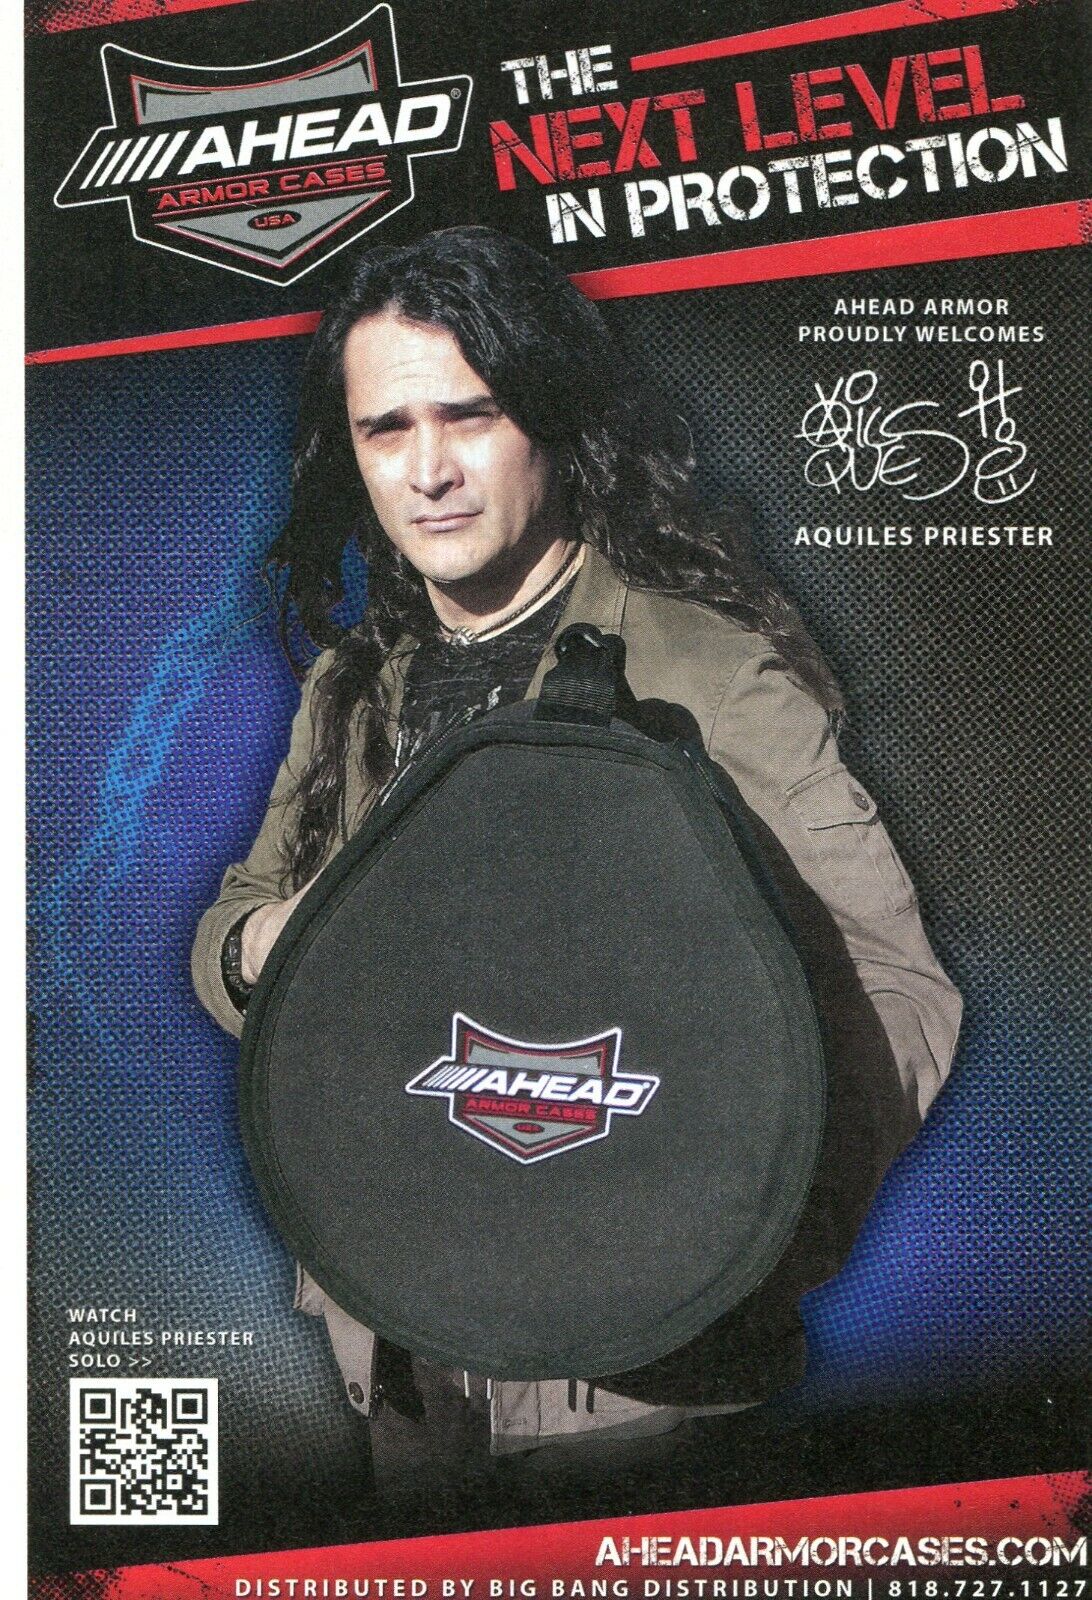 2015 small Print Ad of Ahead Armor Drum Cases w Aquiles Priester